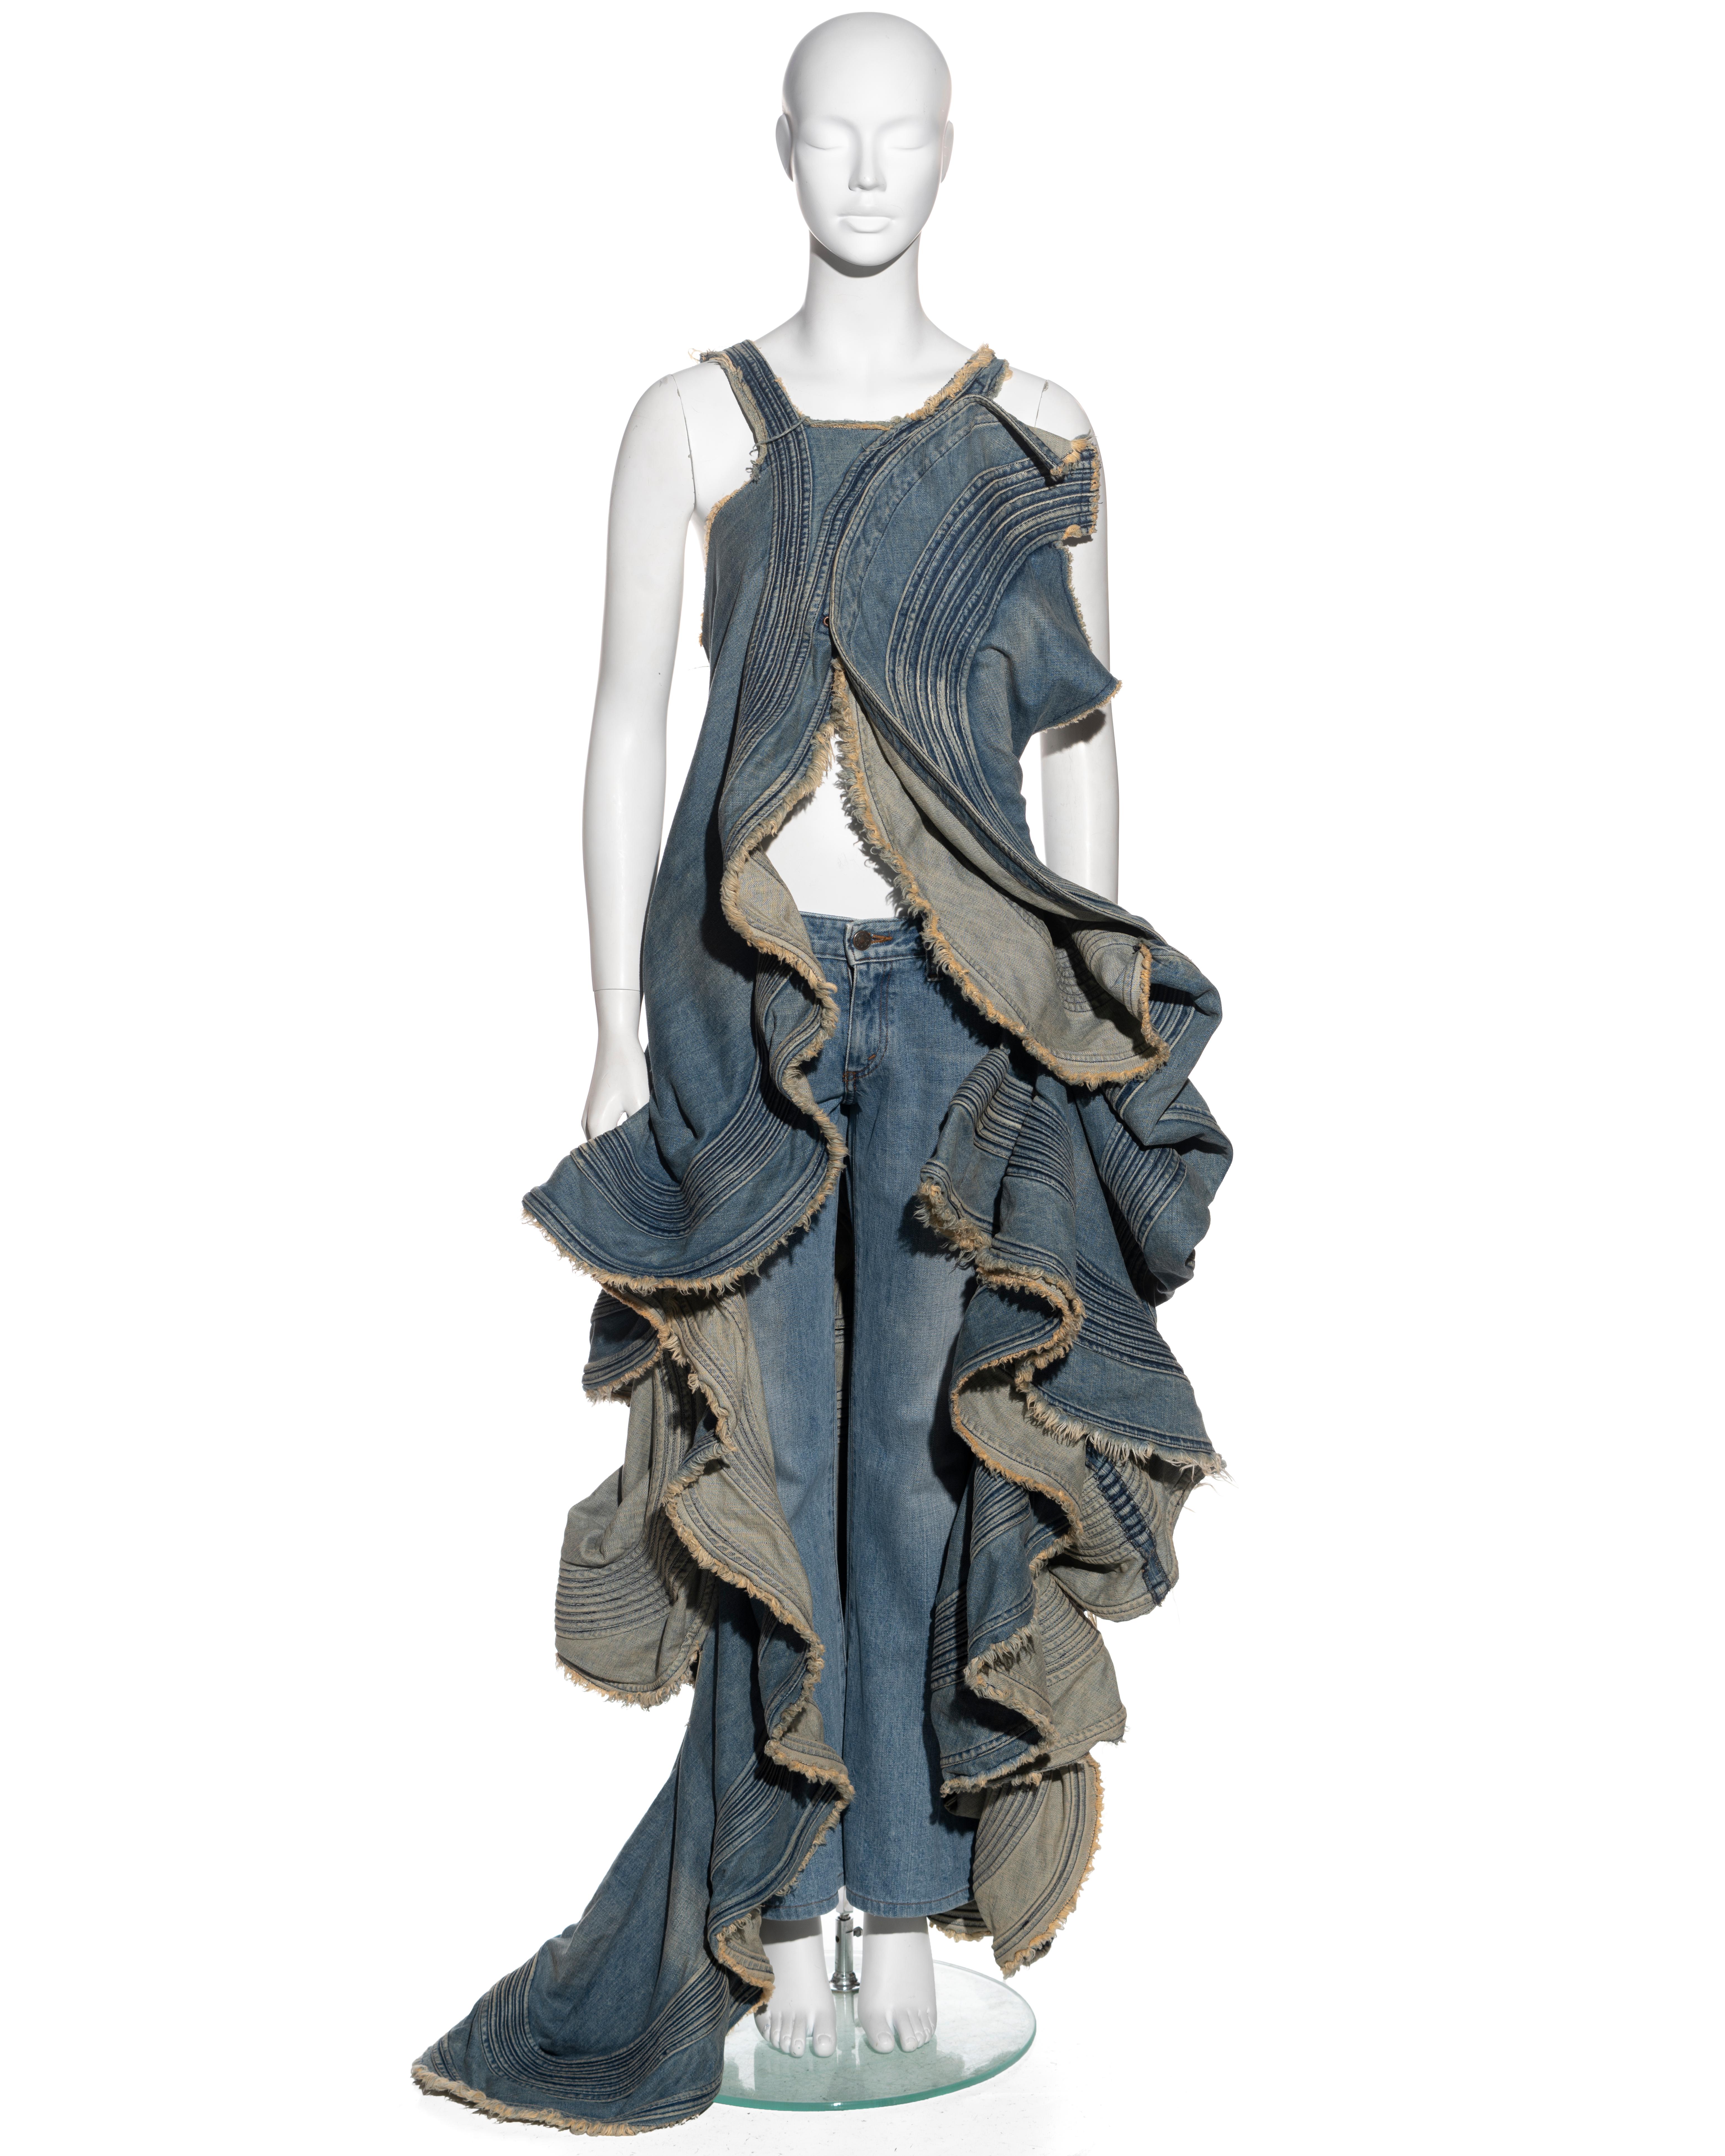 ▪ Junya Watanabe dress and pants ensemble
▪ Sold by One of a Kind Archive
▪ Museum piece
▪ Constructed from Japanese washed denim 
▪ Deconstructed dress with multiple curved panels 
▪ Heavyweight 
▪ Corset hooks at the front opening 
▪ Floor-length